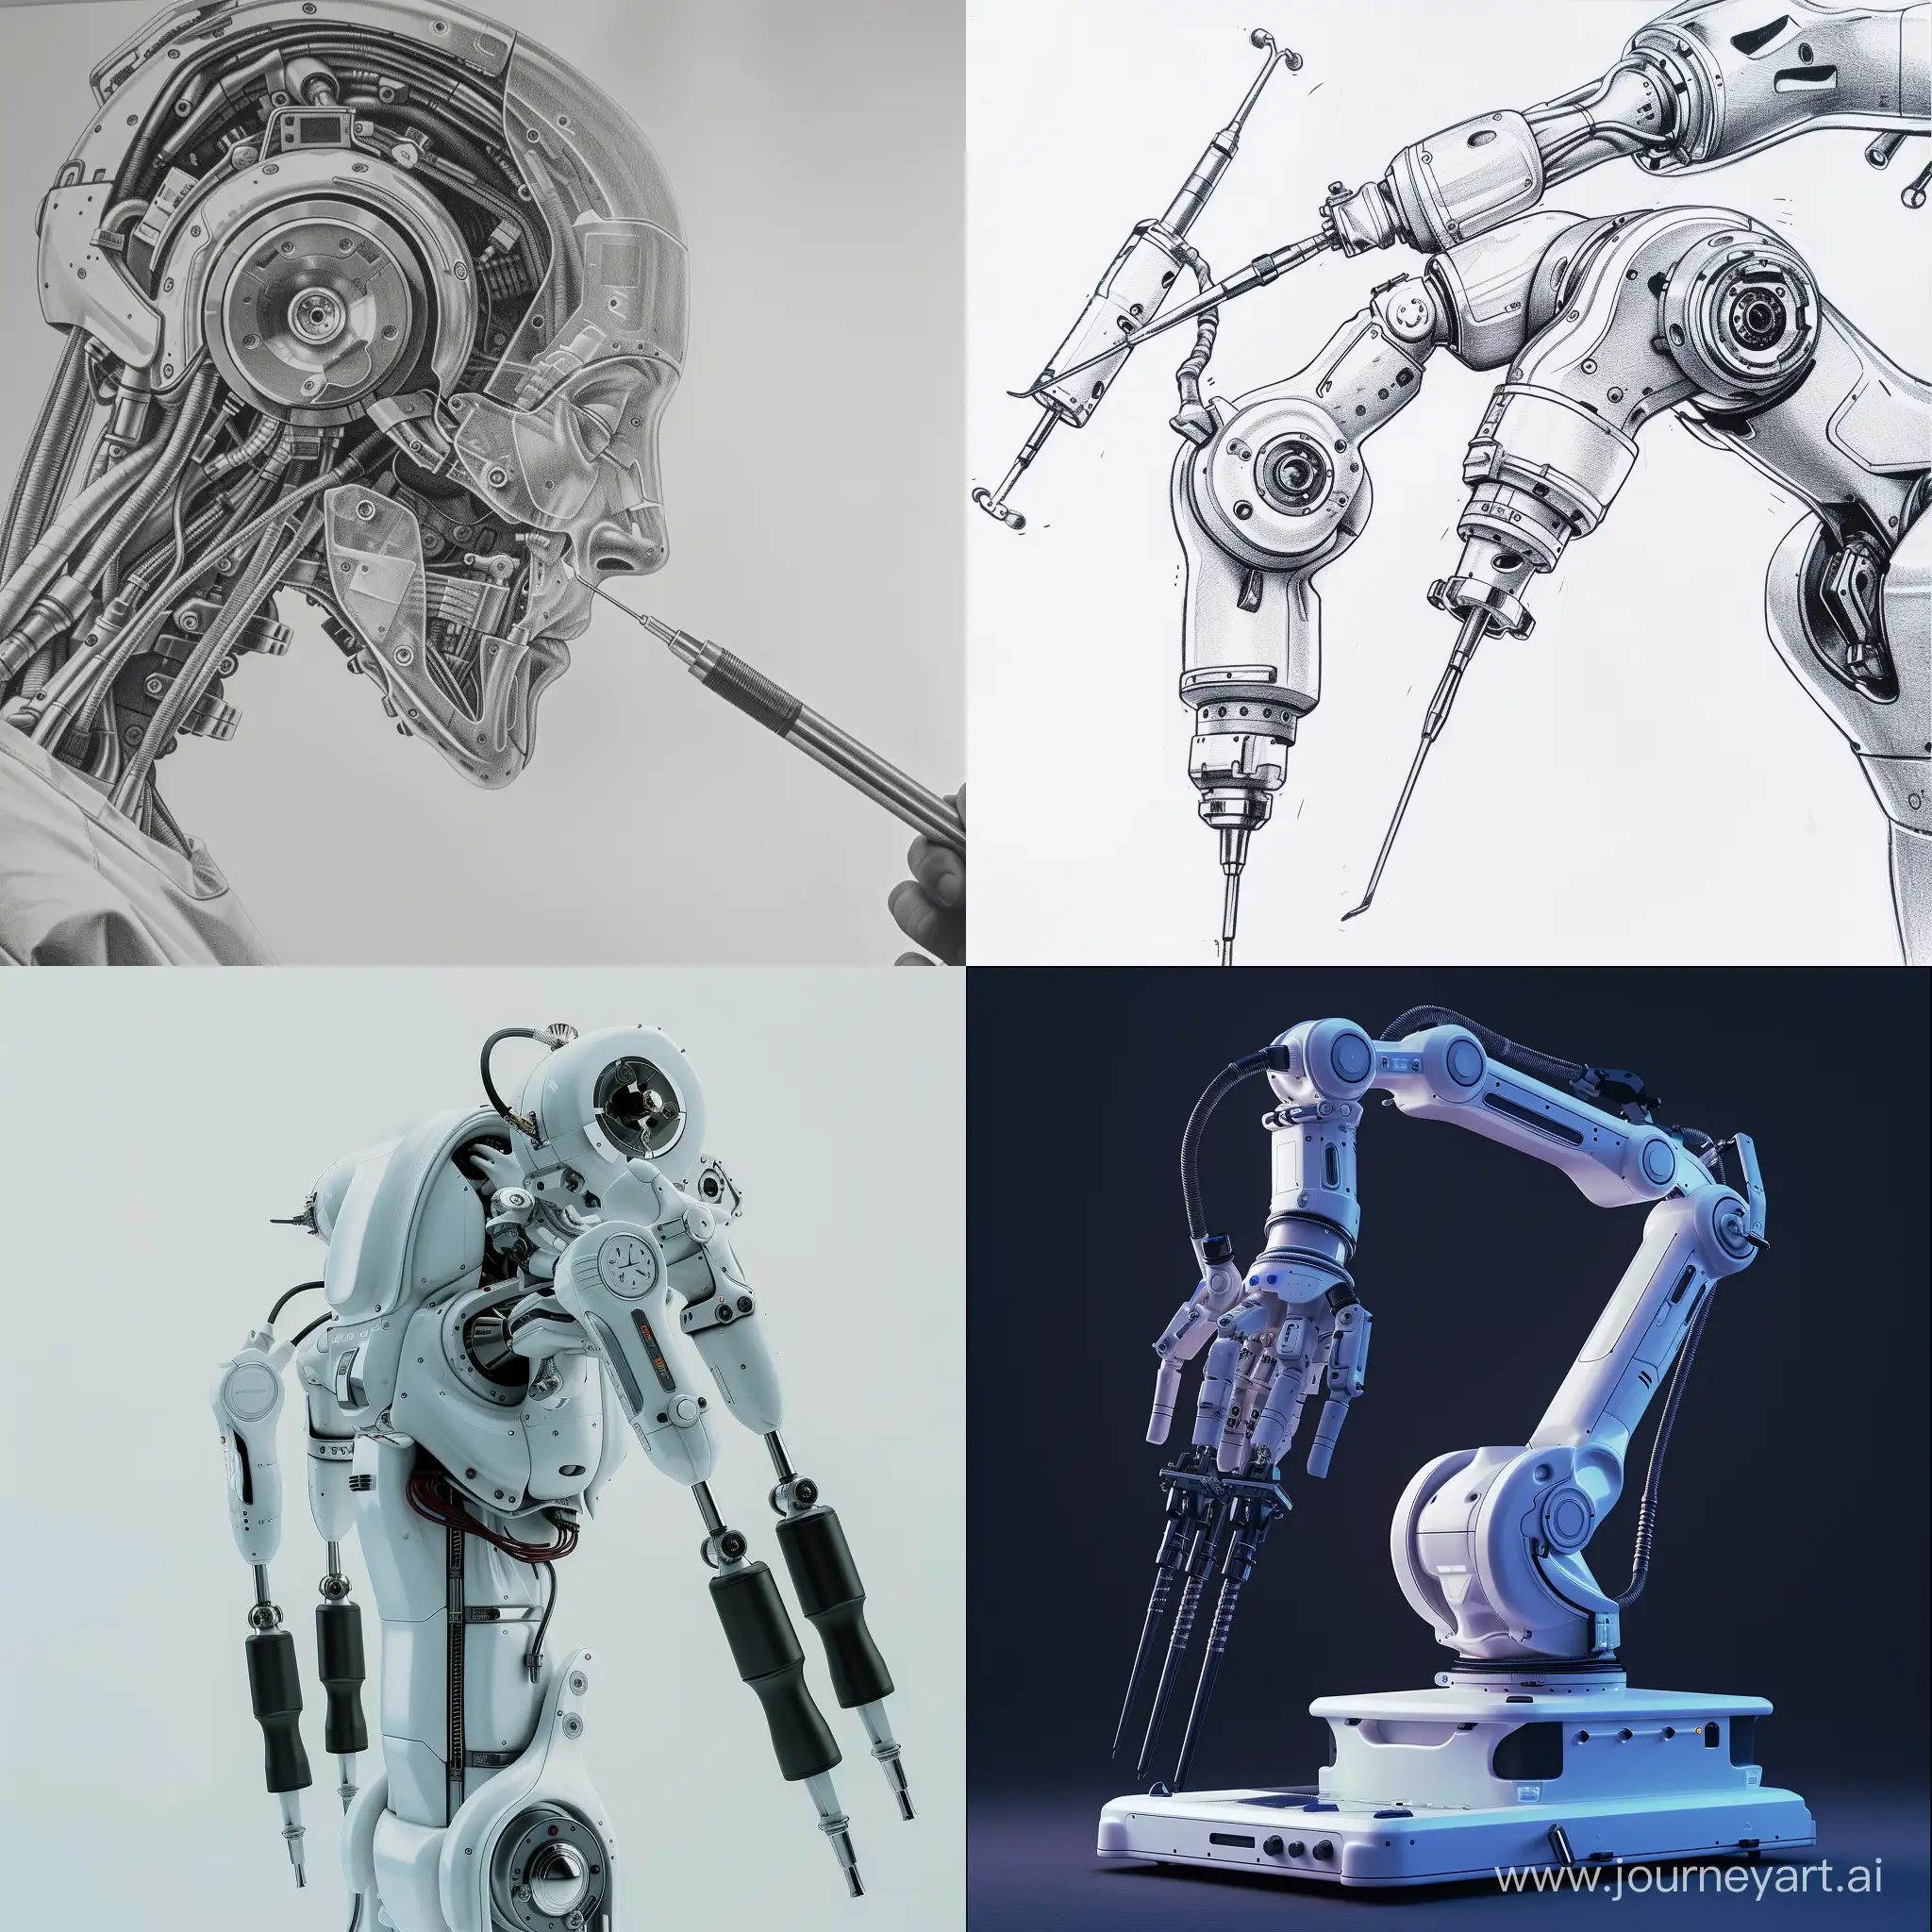 Cutting-edge robotic surgery,hyper texture,the most realistic drawing.